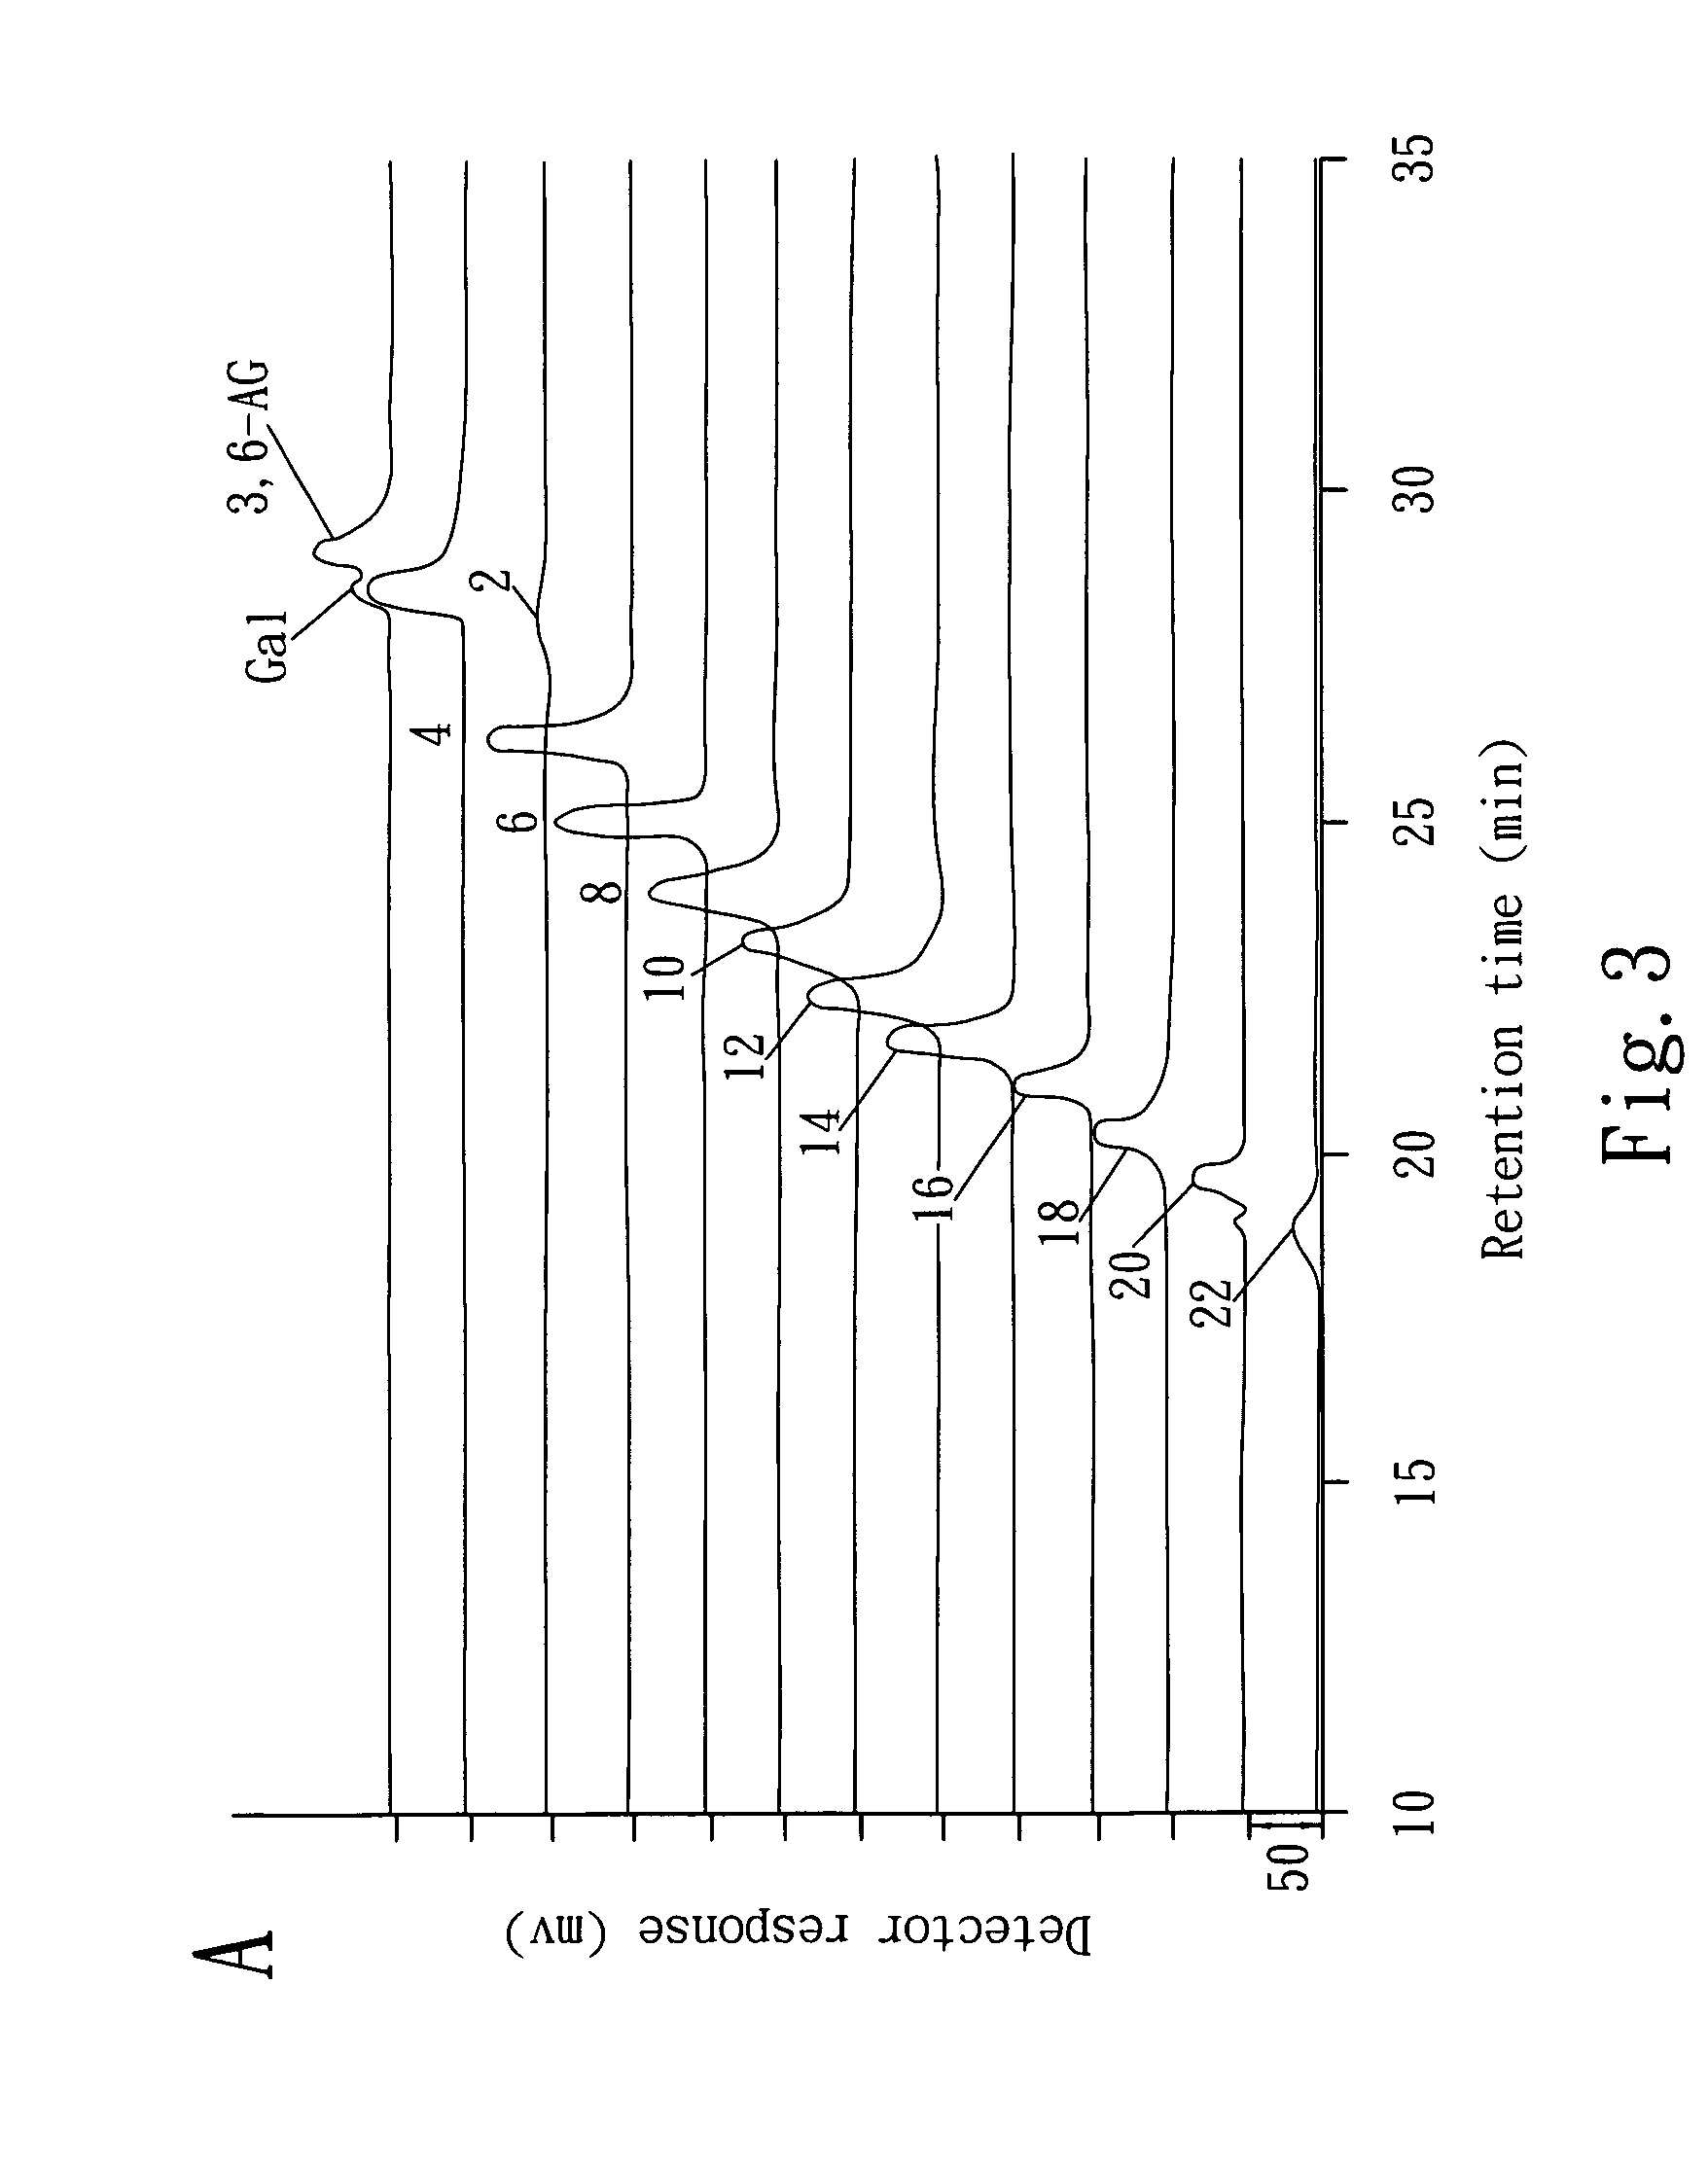 Manufacturing method of separating and purifying neoagarooligosaccharides having degrees of polymerization from 2 to 22